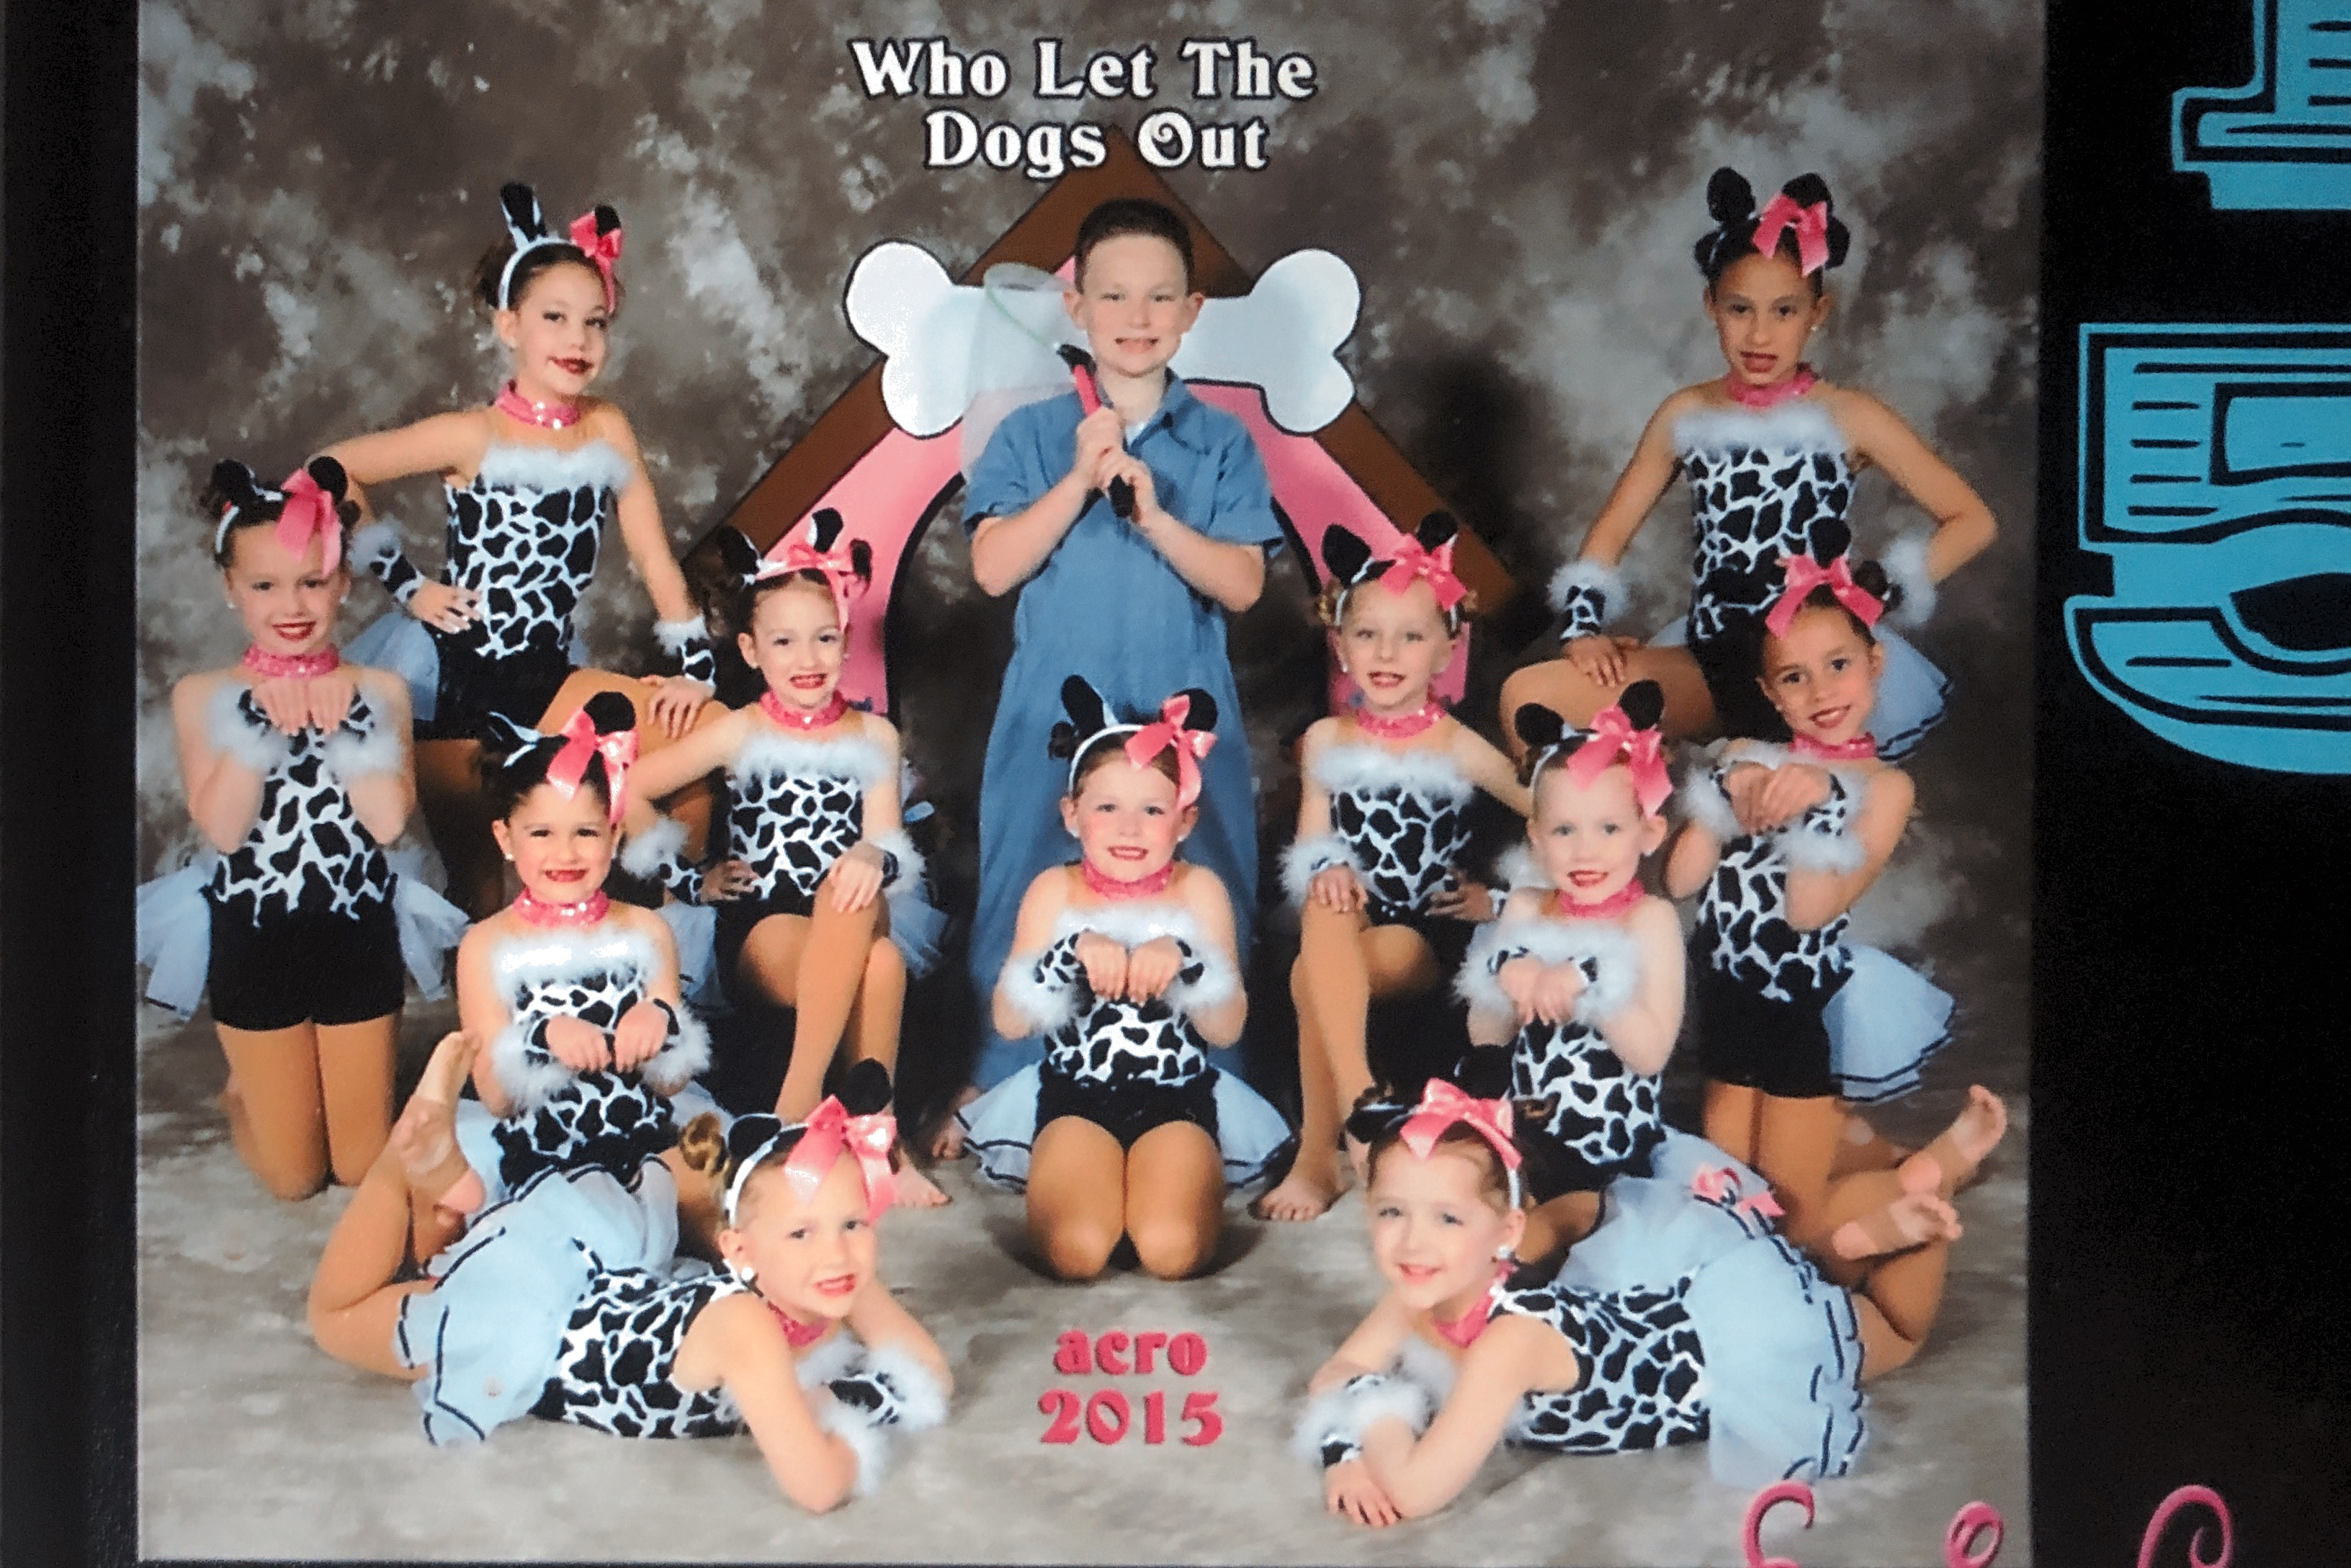 Who let the dogs out empire center of dance 2015